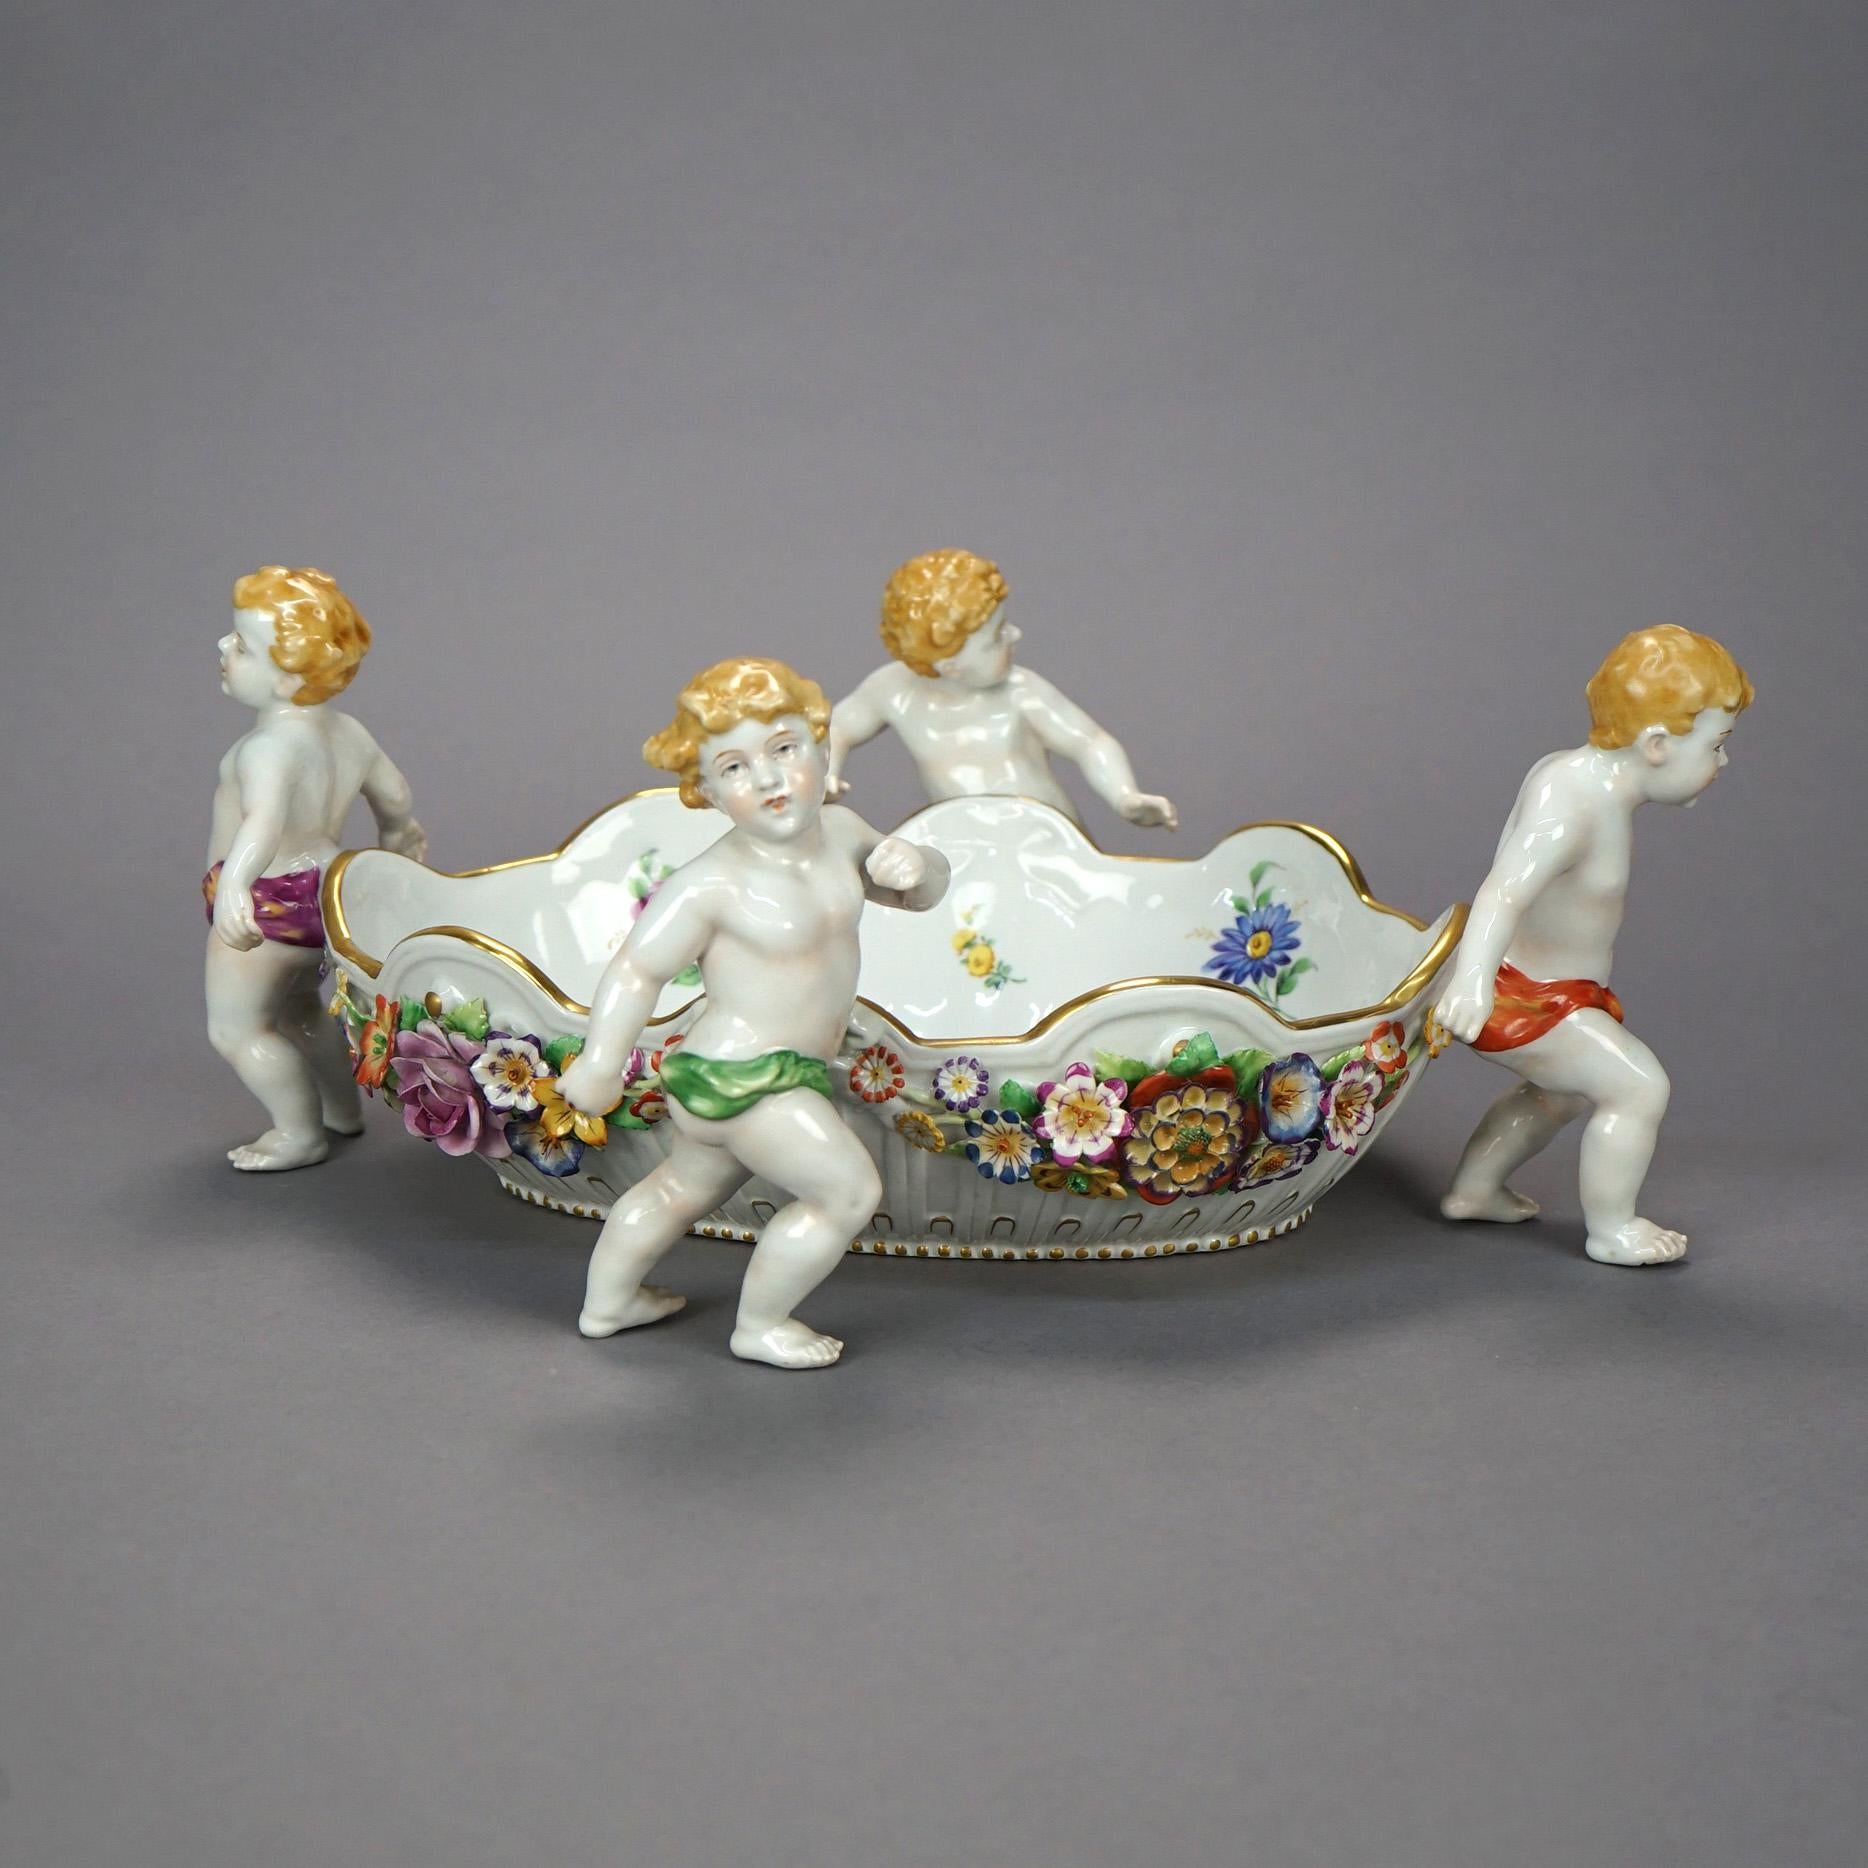 An antique German figural center bowl by Schierholz offers porcelain construction with cherubs and applied flowers throughout, hand painted and with gilt highlights, maker mark on base as photographed, circa 1910.

Measures- 6.5''H x 16.5''W x